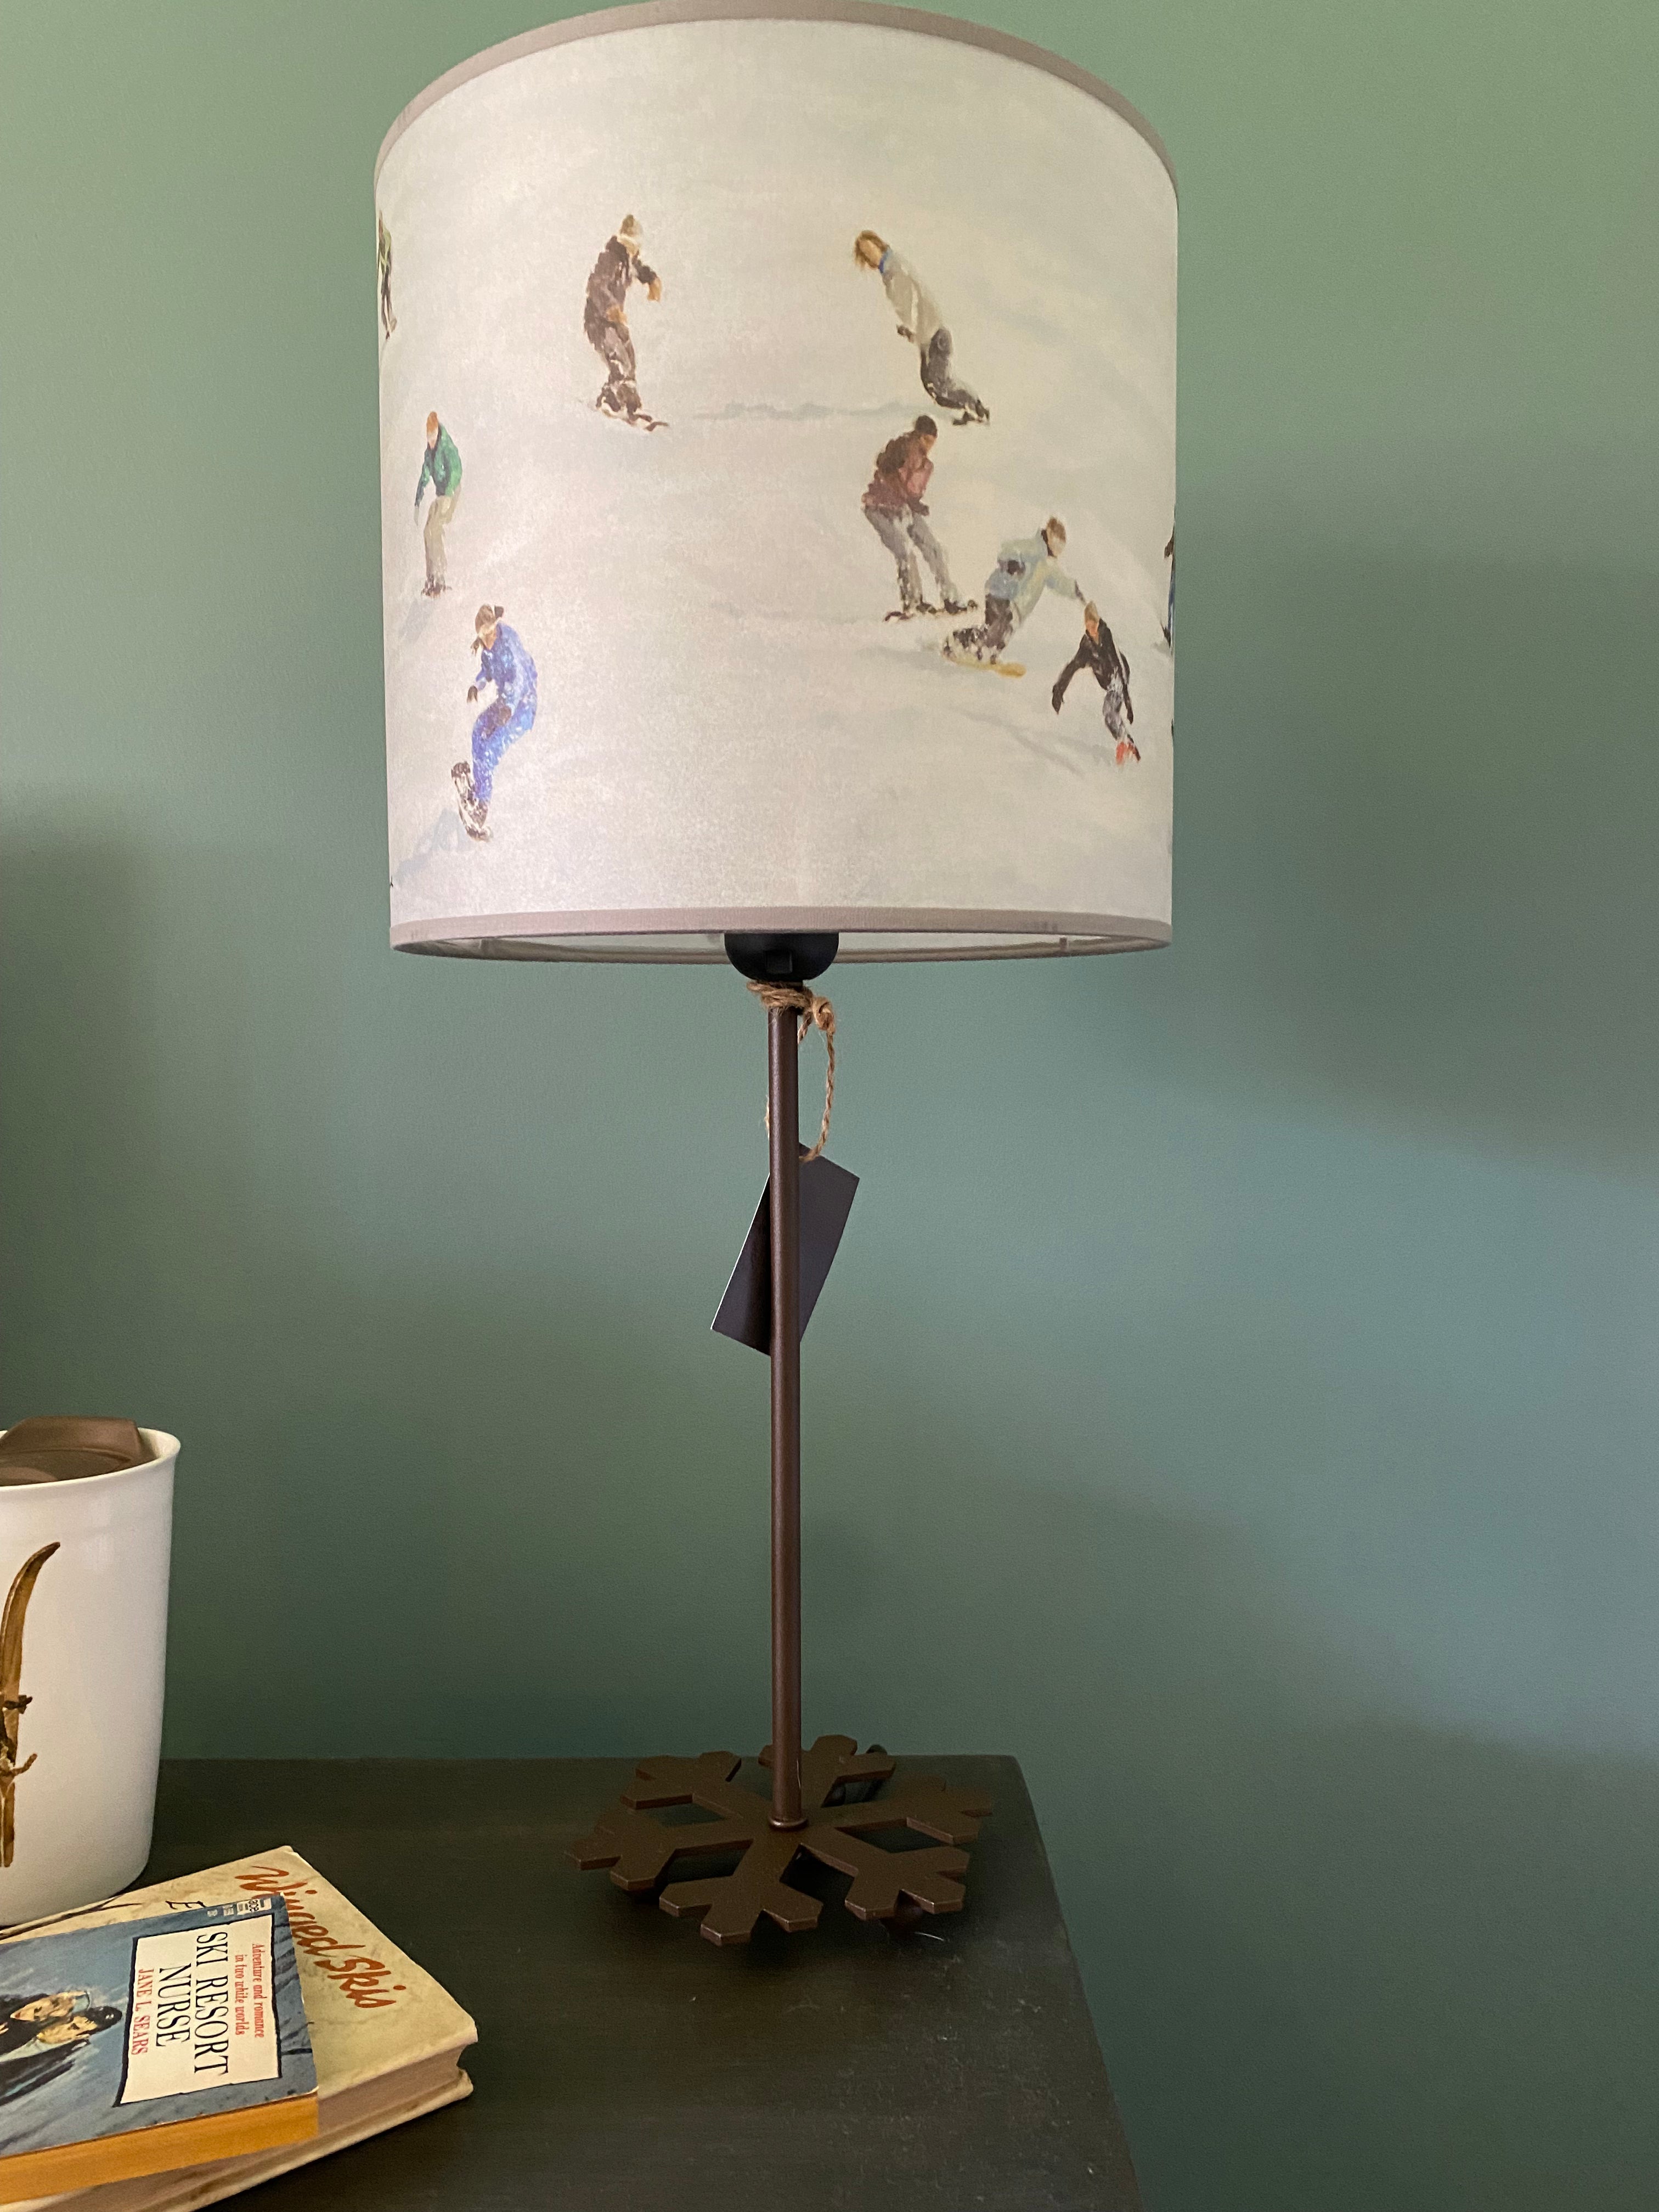 lamp with a round brown metal base in the shape of a snowflake, supporting a metal rod, topped by colour printed canvas lamp shade depicting a slope full of snowboarders riding downhill, in front a green wall & on top of a wooden table, with a coffee mug and two vintage books.